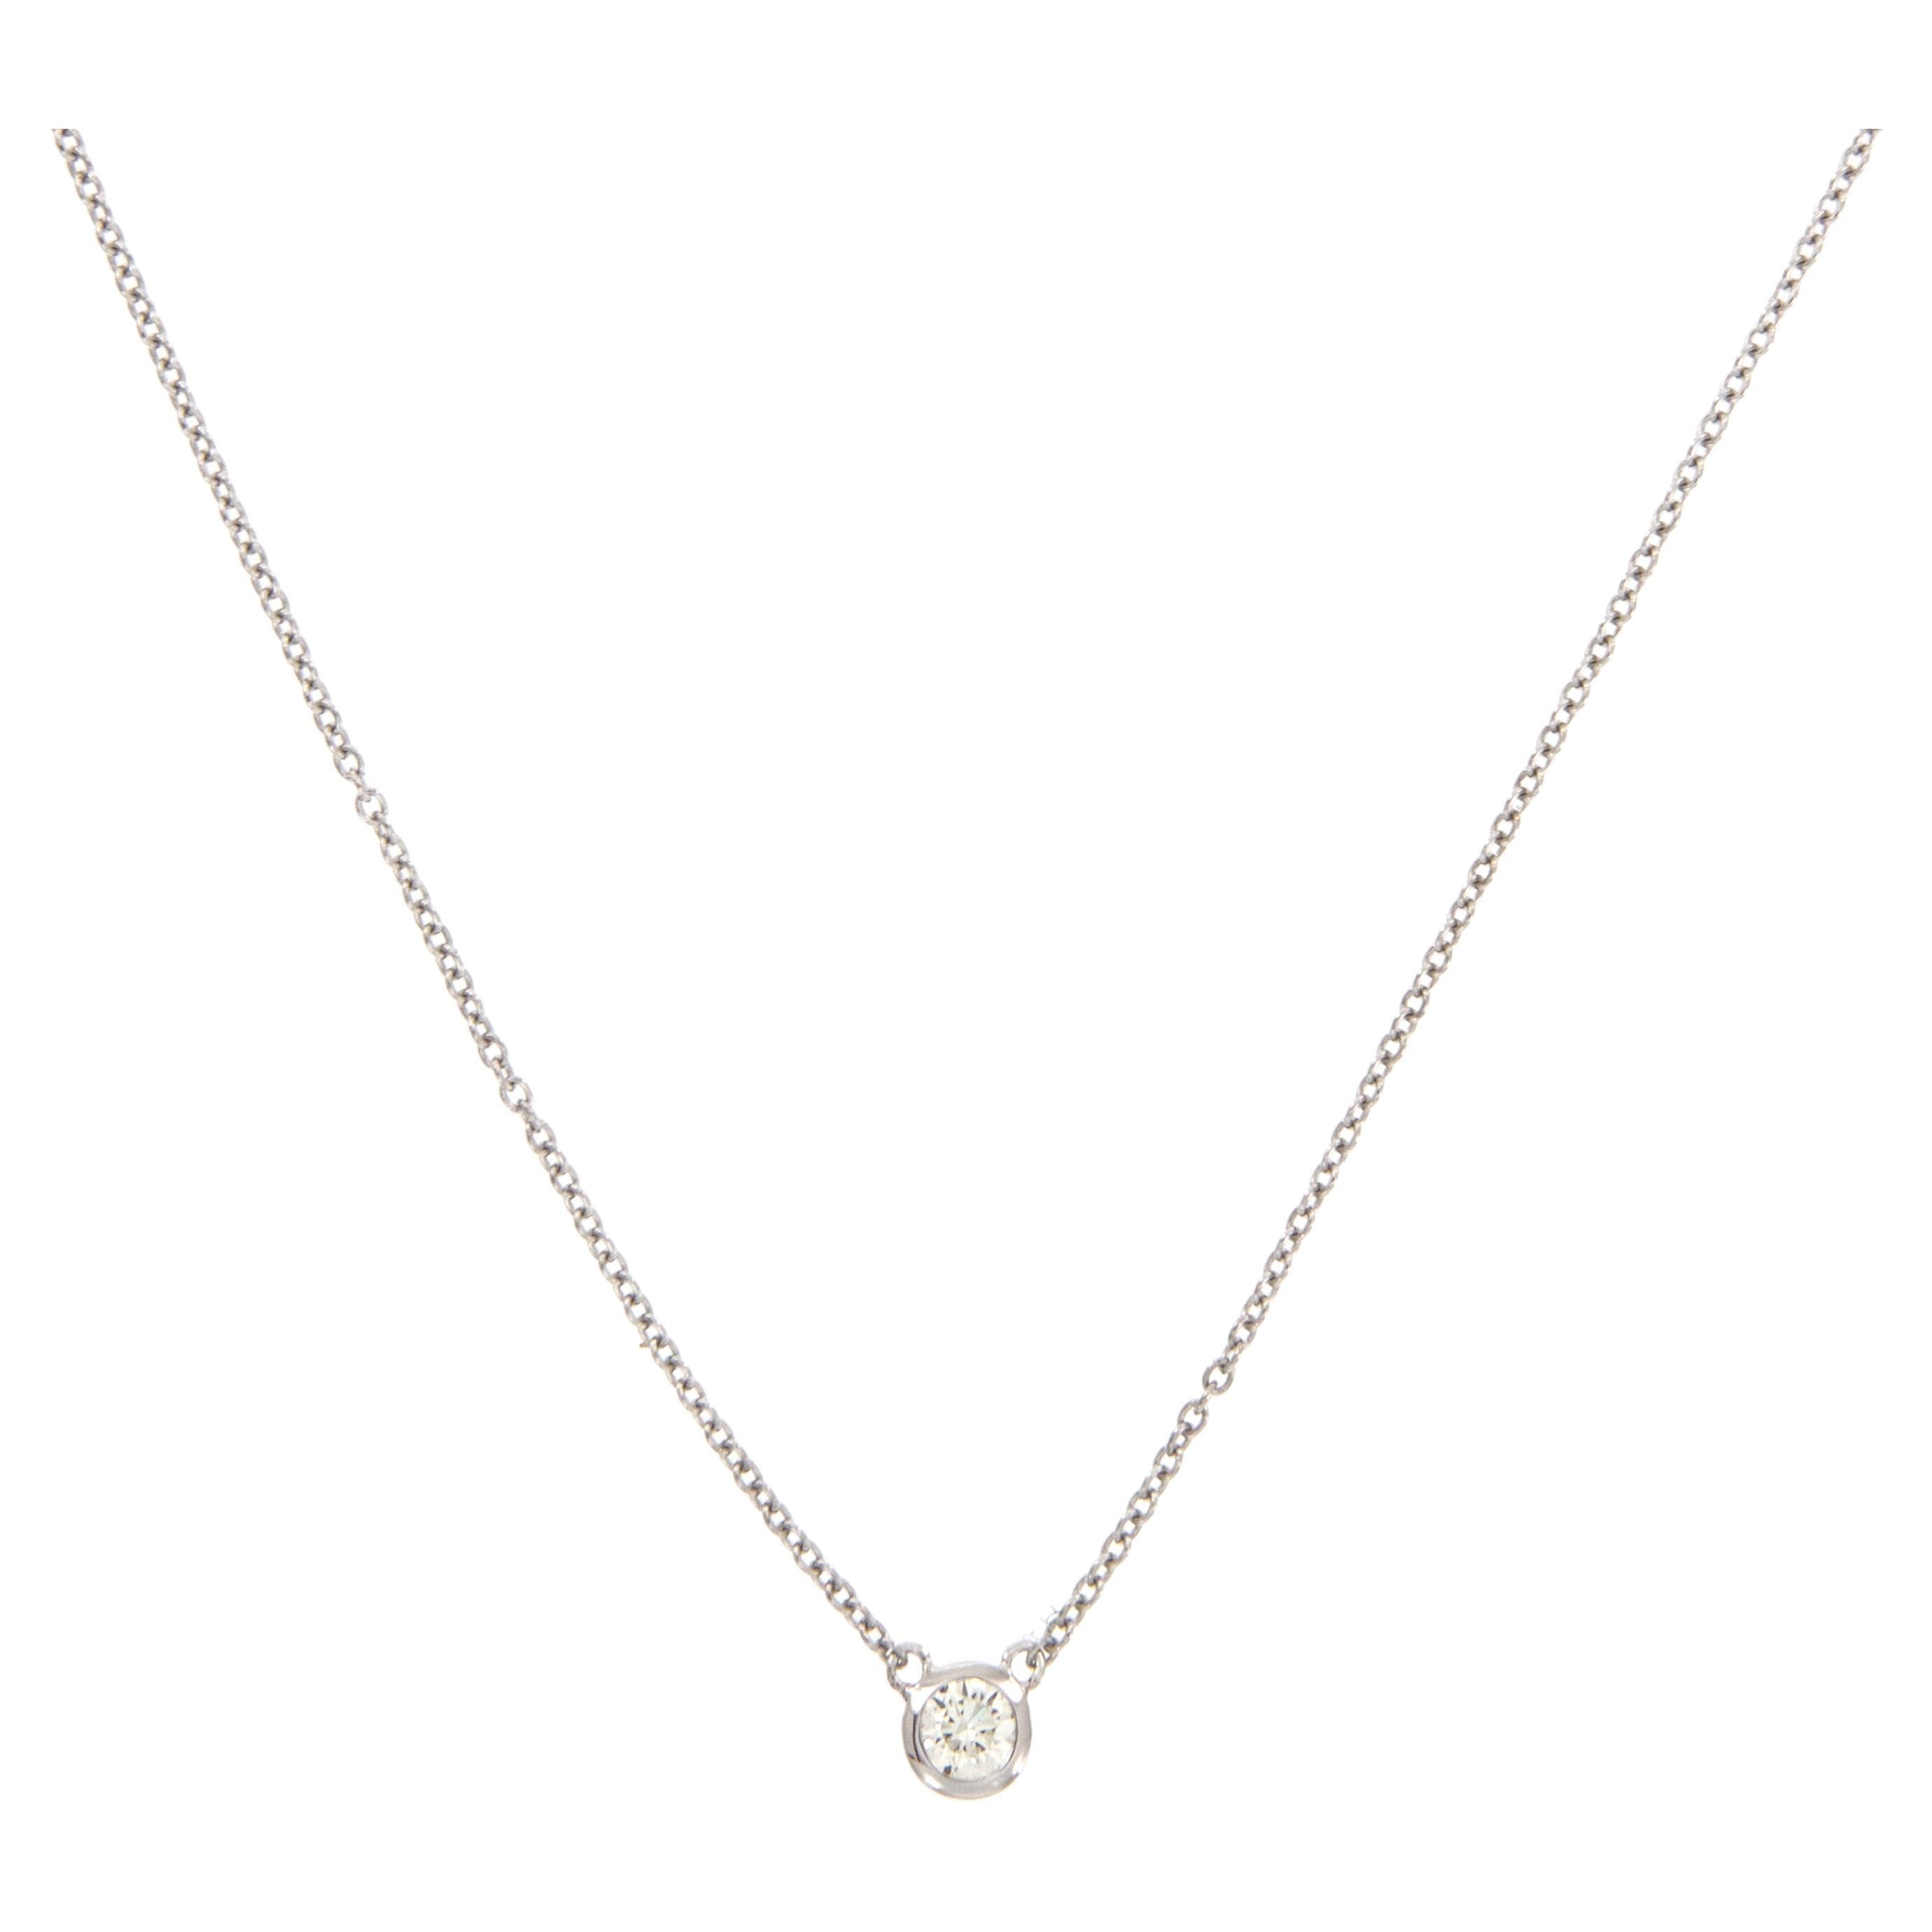 If you are looking for the one necklace you put on & never have to take off - look no further! This is the necklace for you- crafted from 18 karat white gold with one round brilliant diamond = 0.05 Carat SI2 clarity and H color bezel set in the